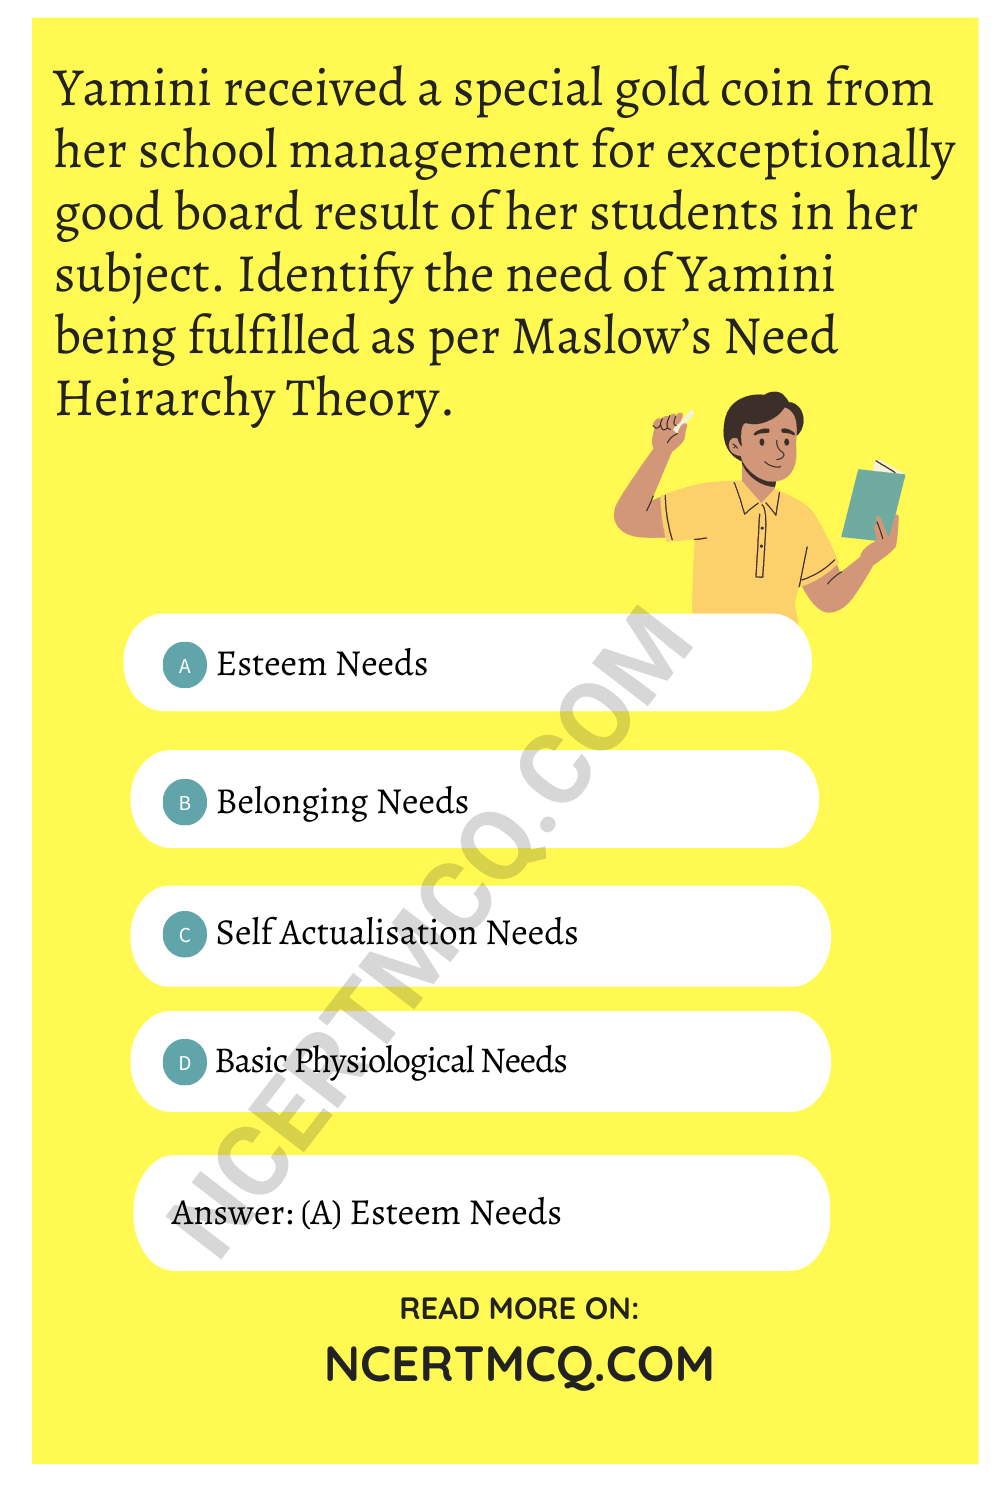 Yamini received a special gold coin from her school management for exceptionally good board result of her students in her subject. Identify the need of Yamini being fulfilled as per Maslow’s Need Heirarchy Theory.